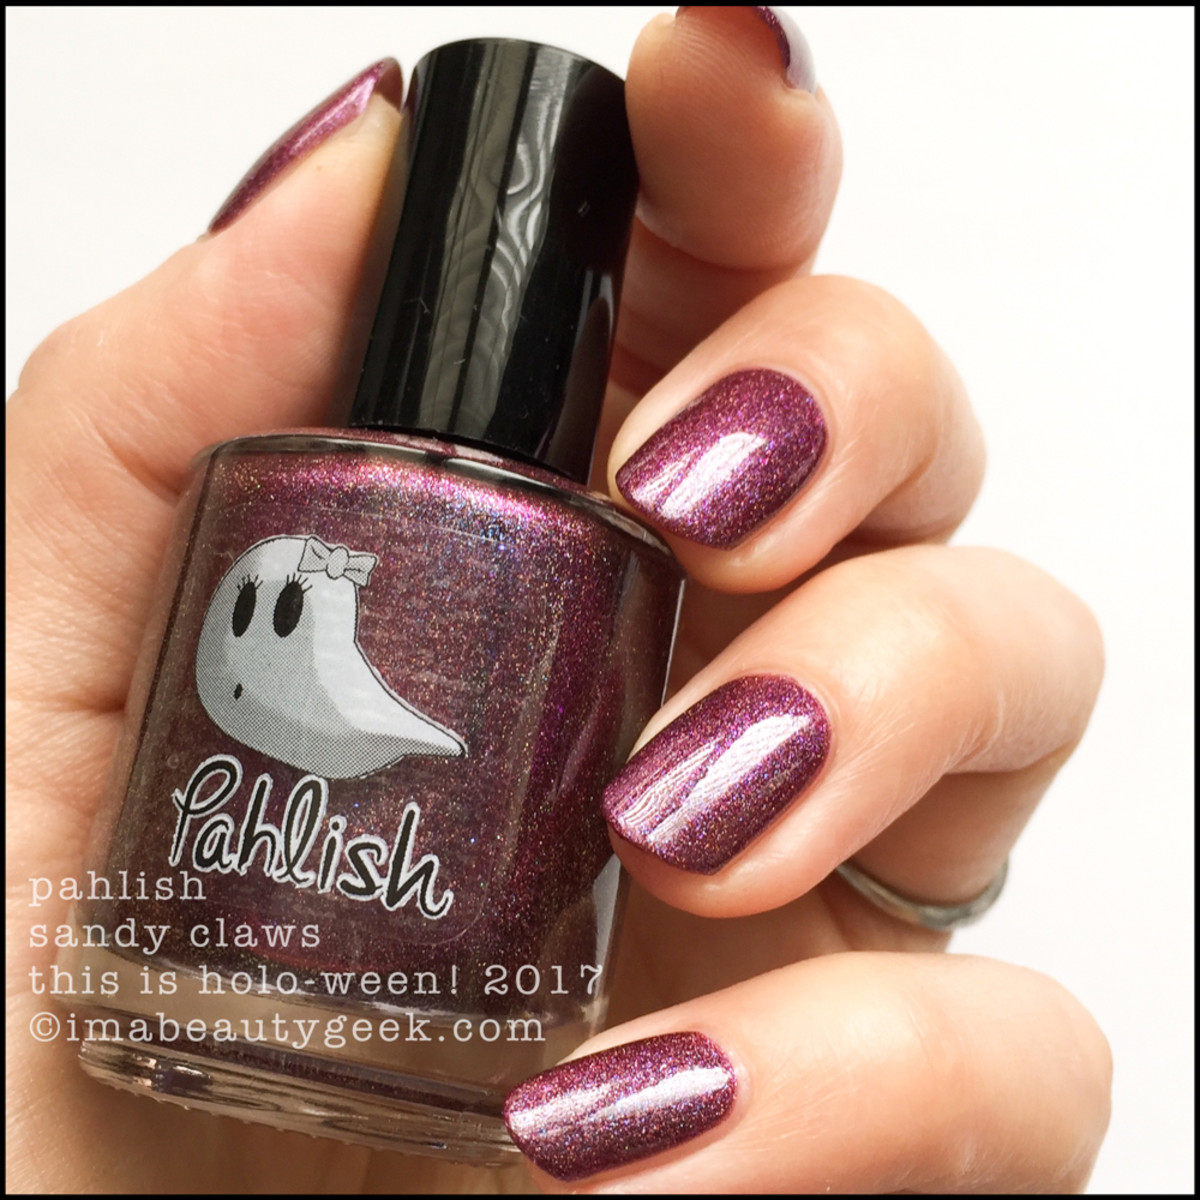 Pahlish Sandy Claws - This is Holo-ween! 2017